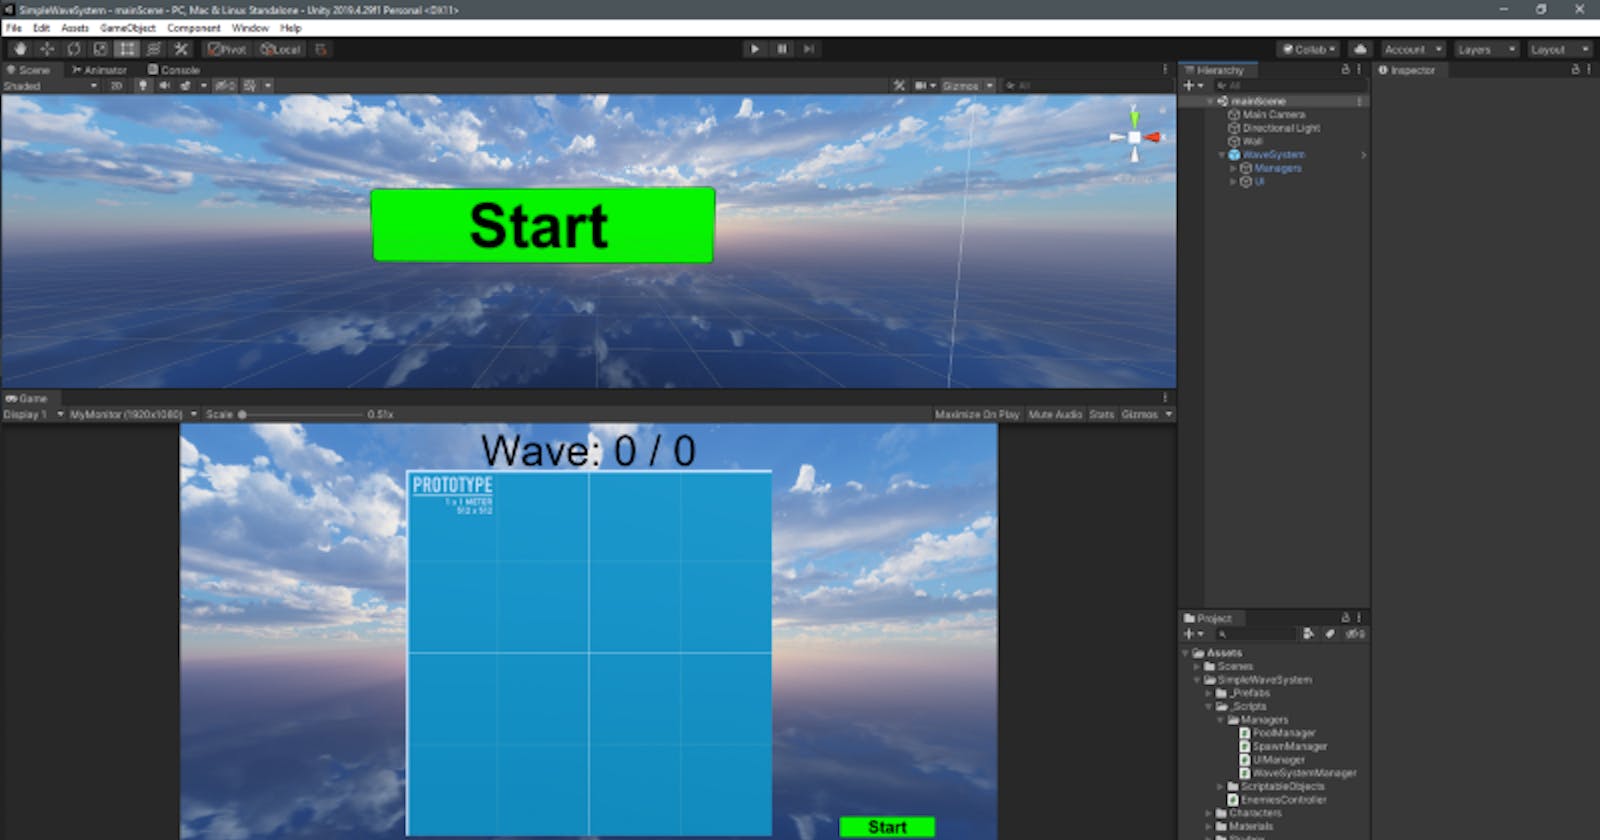 A Simple Wave System on Unity